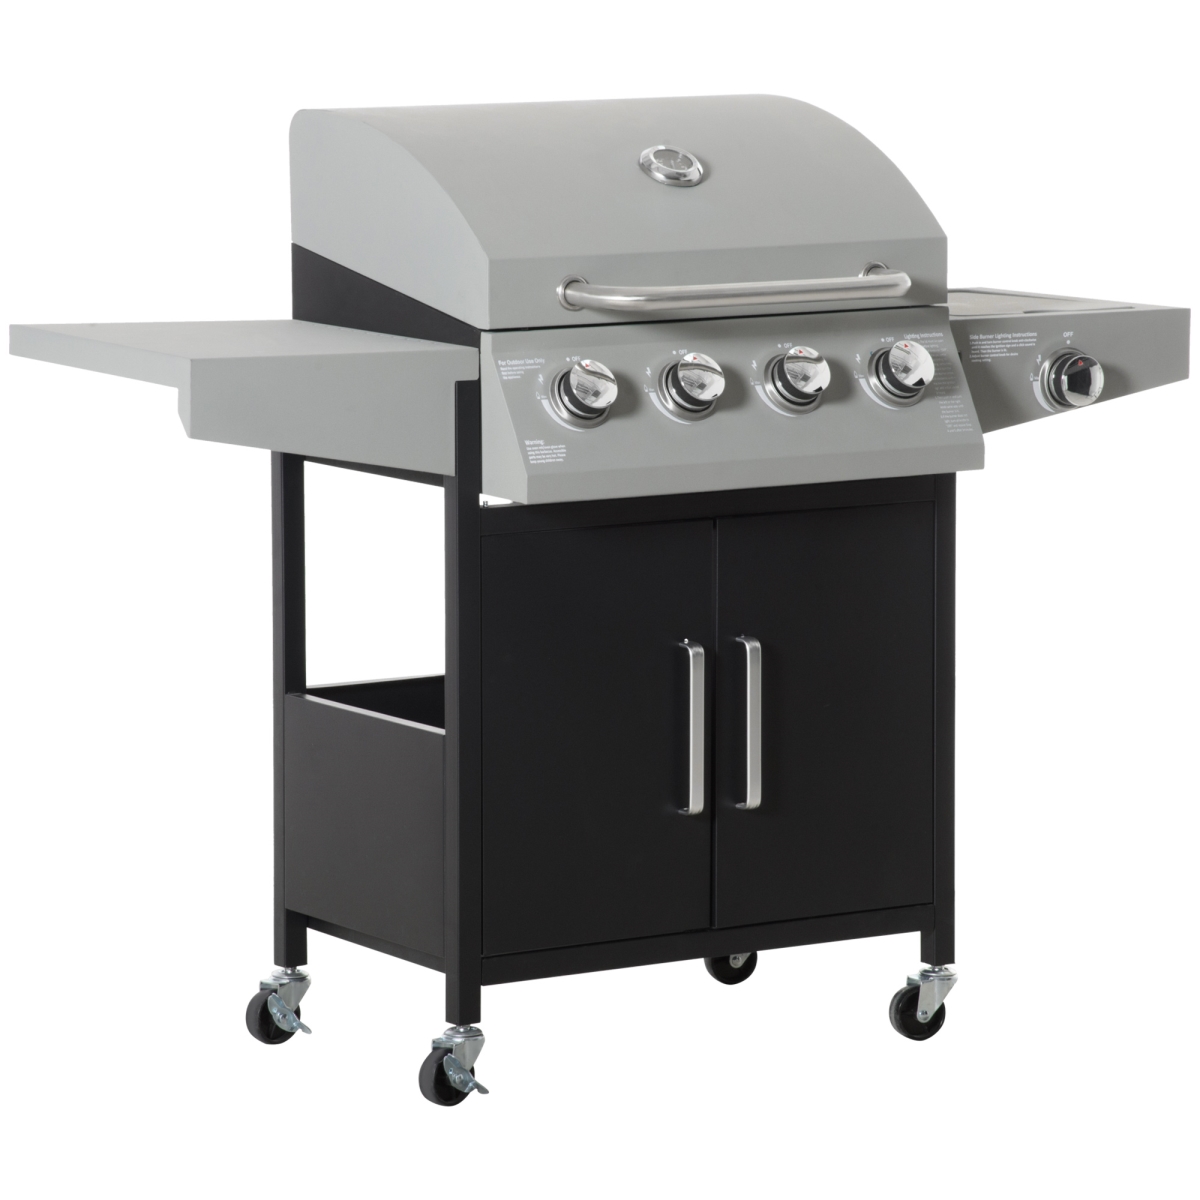 212 Main 846-102V80SR 52 in. Outsunny Barbecue Grill with Wheels 4 Plus 1 Burner Liquid Propane Gas Outdoor Cabinet Style BBQ Trolley wit